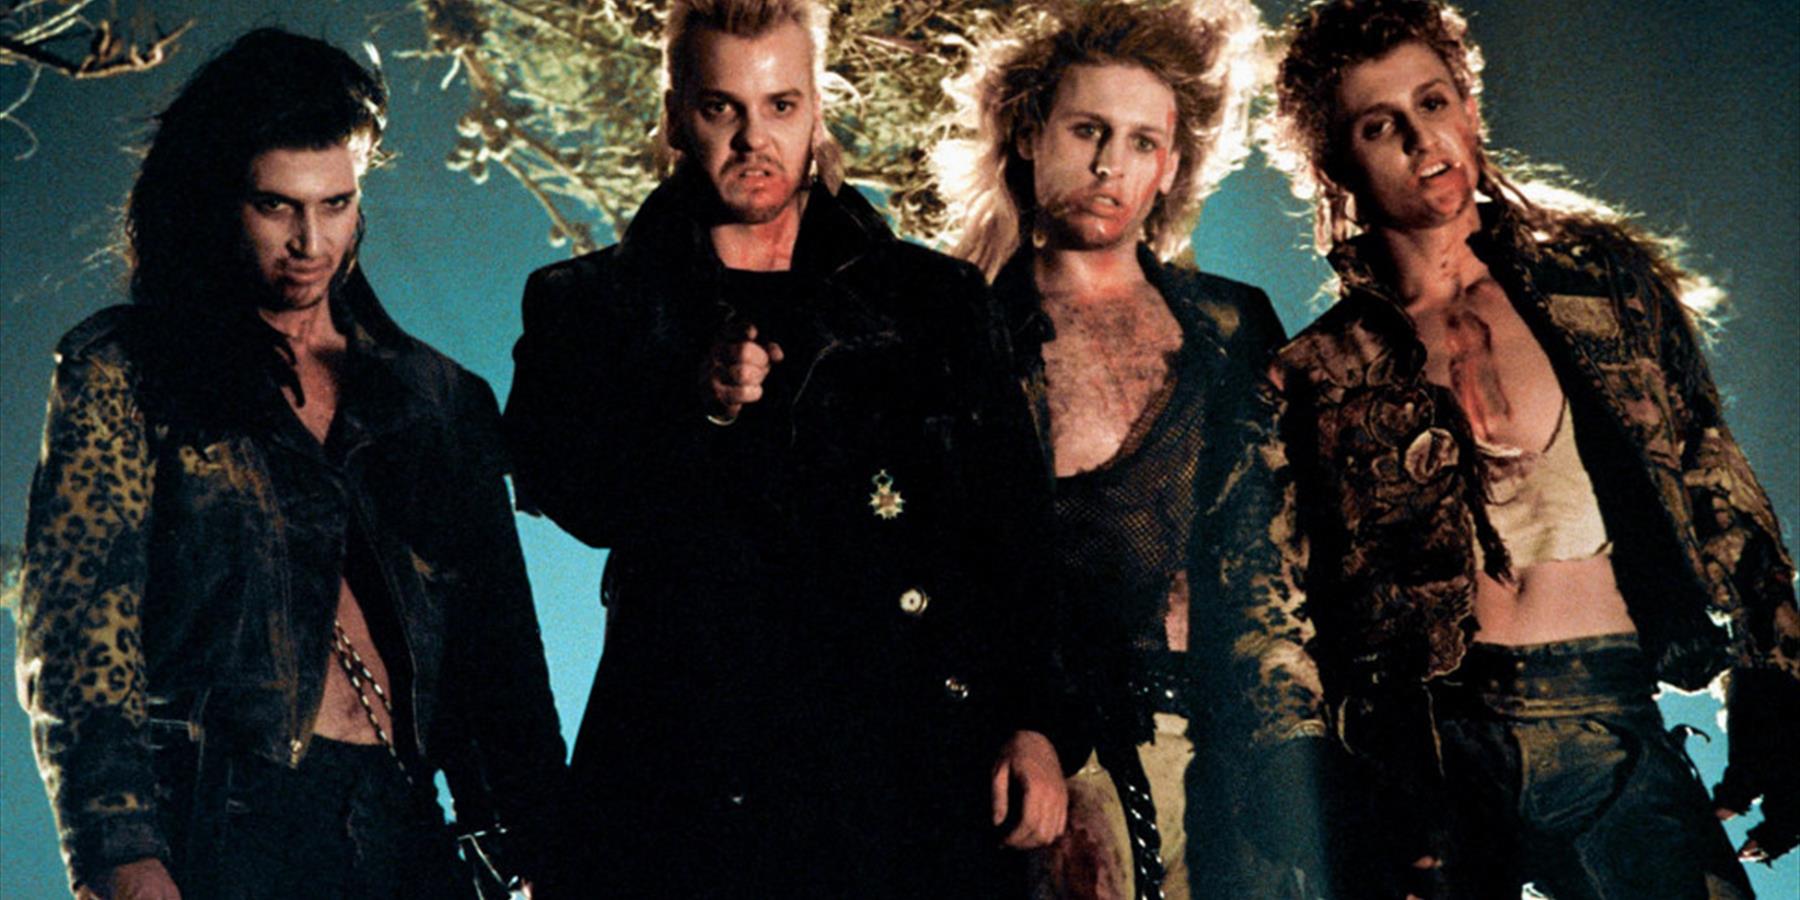 The Lost Boys cast image